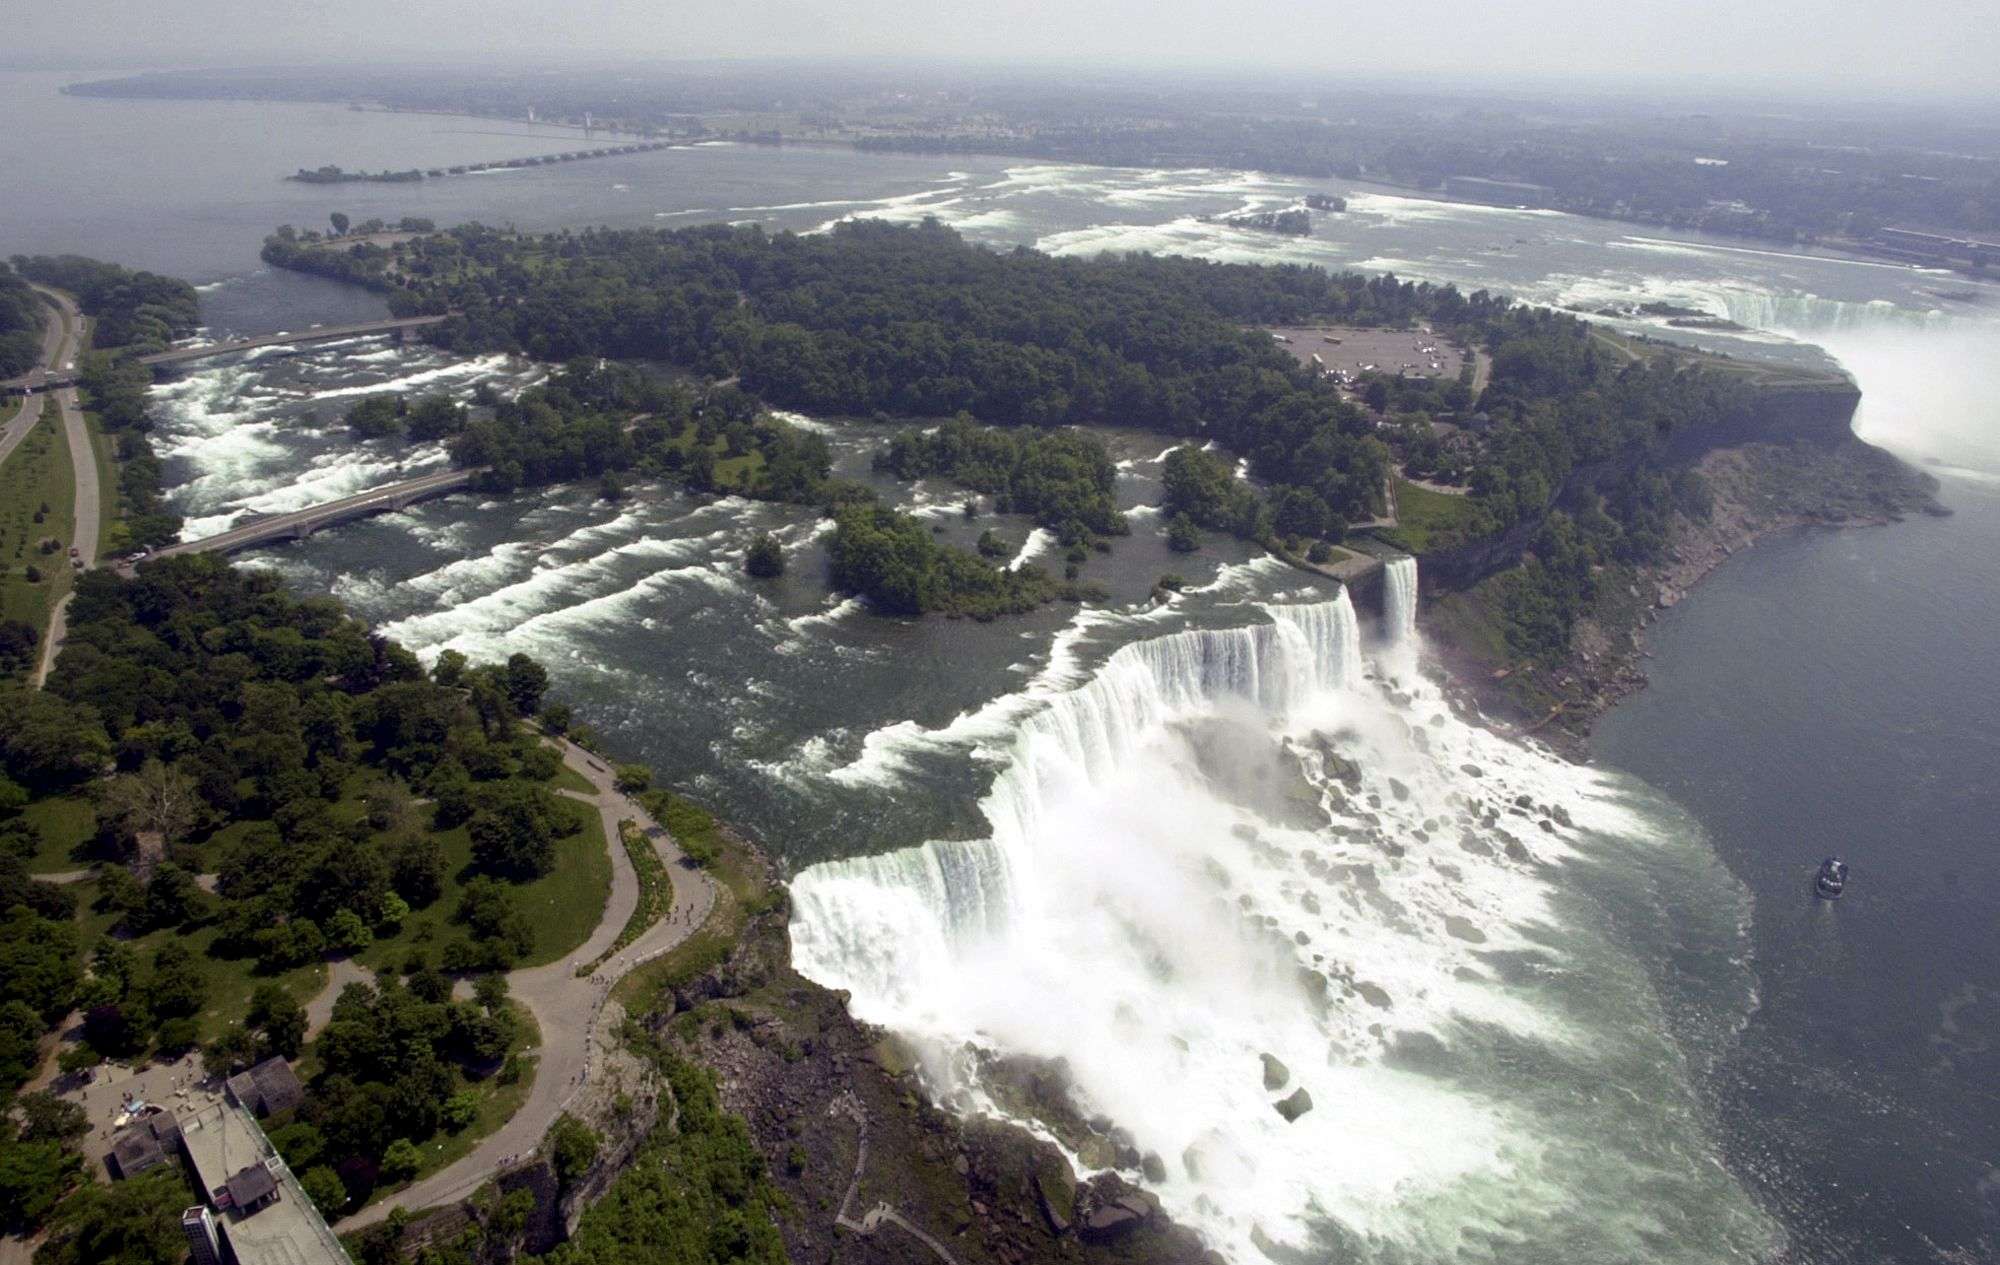 FILE - In this June 14, 2001, file aerial photo, the United States side, foreground, of Niagara Falls is viewed in Niagara Falls, N.Y. New York officials are considering temporarily turning Niagara Falls into a trickle. State officials are holding a public hearing this week to discuss plans for replacing 115-year-old bridges, left, linking the mainland to islands near the brink of the falls. To do so, they might reduce the flow on the American side of the falls by building a temporary structure to redirect Niagara River water to the Canadian side, upper right. (AP Photo/David Duprey, File) Summary